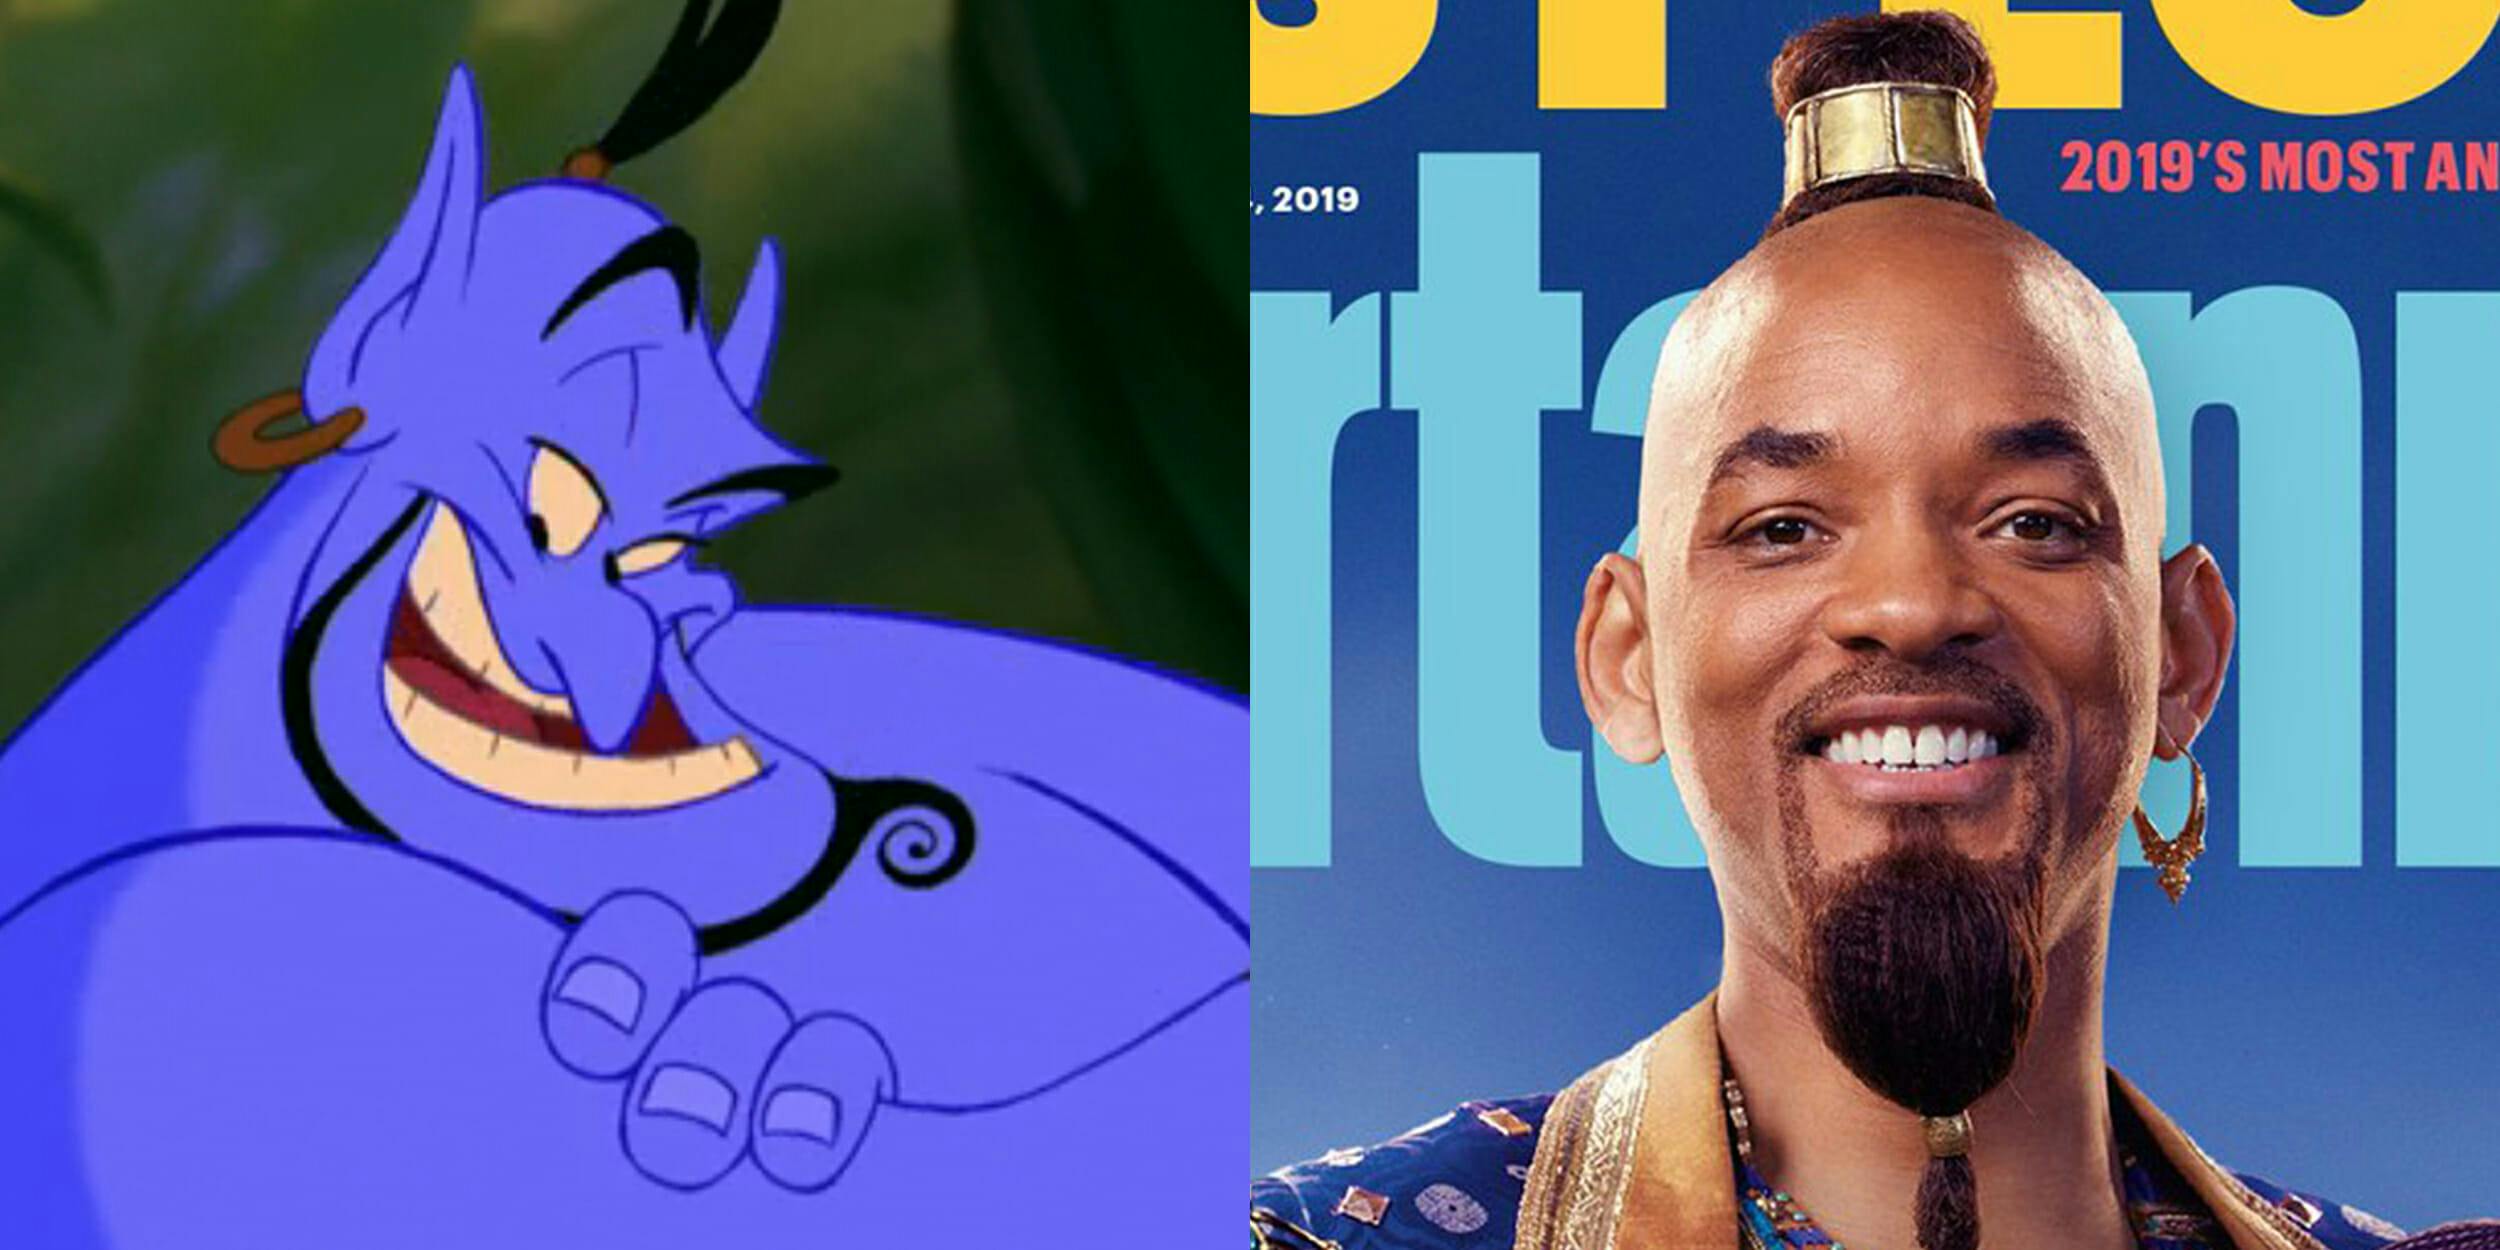 People Don't Like Will Smith's Genie Look in the 'Aladdin' Remake